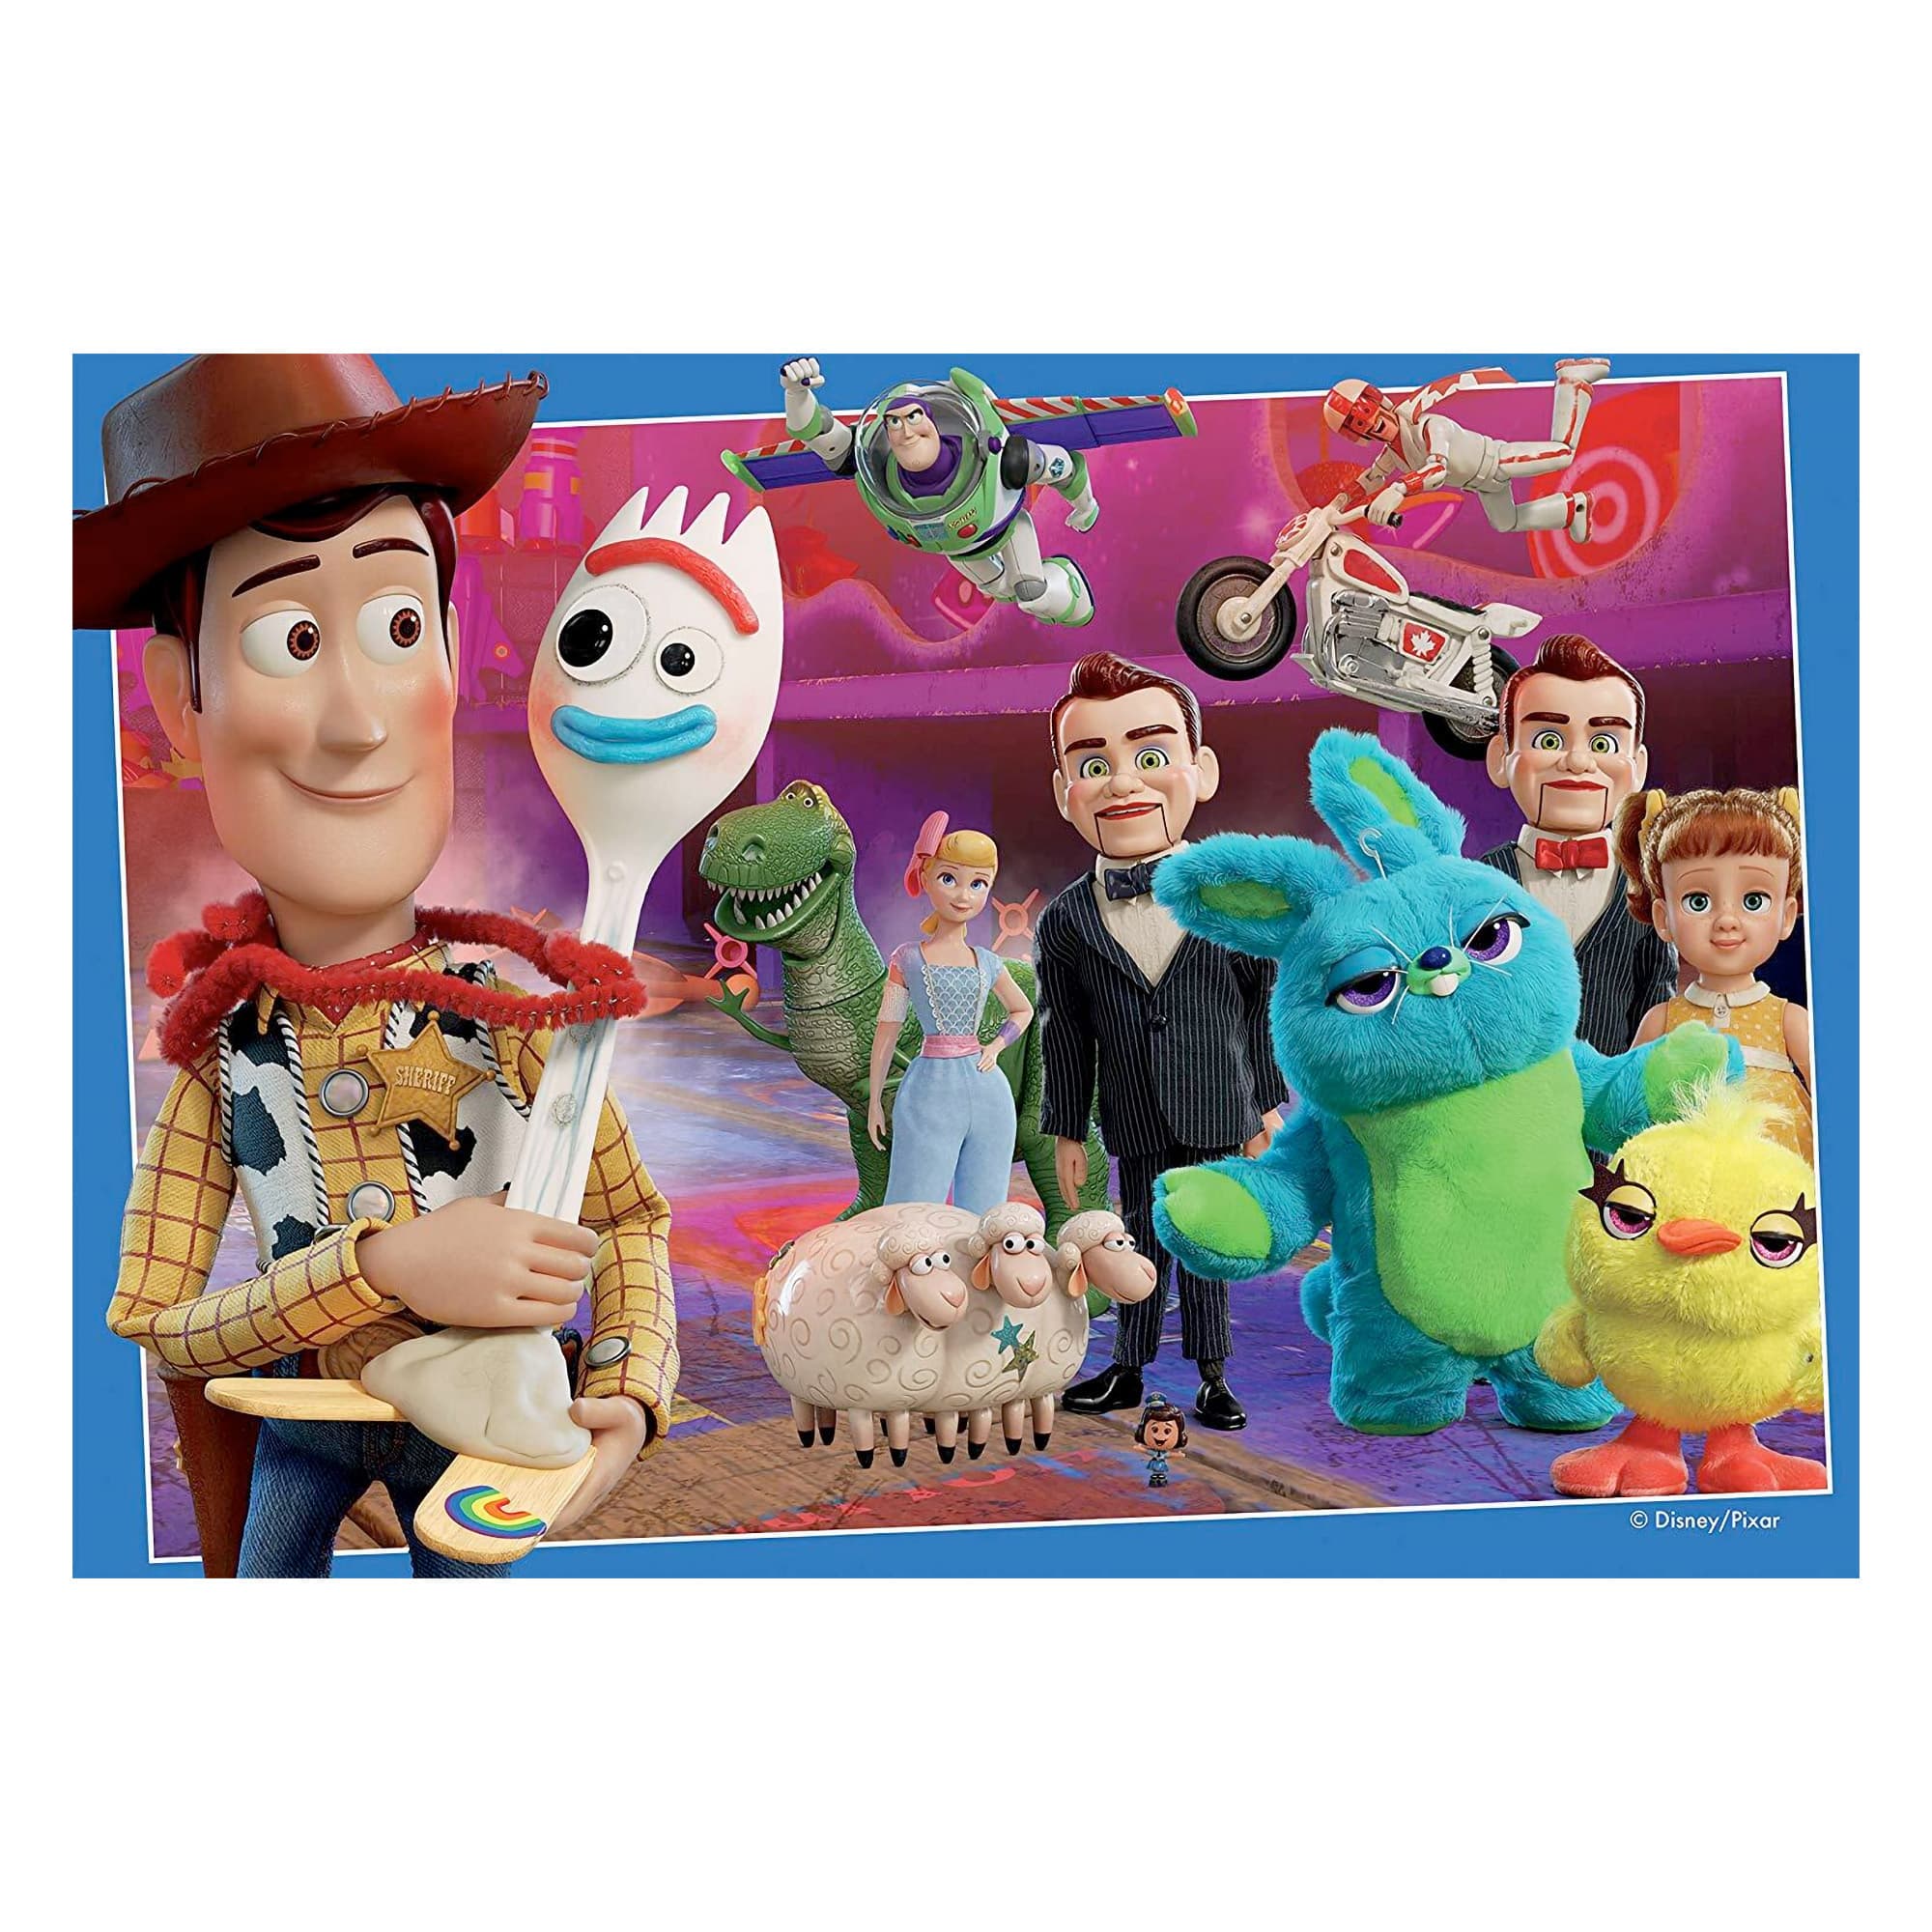 Ravensburger - Toy Story 4 - 35 Piece Jigsaw Puzzle